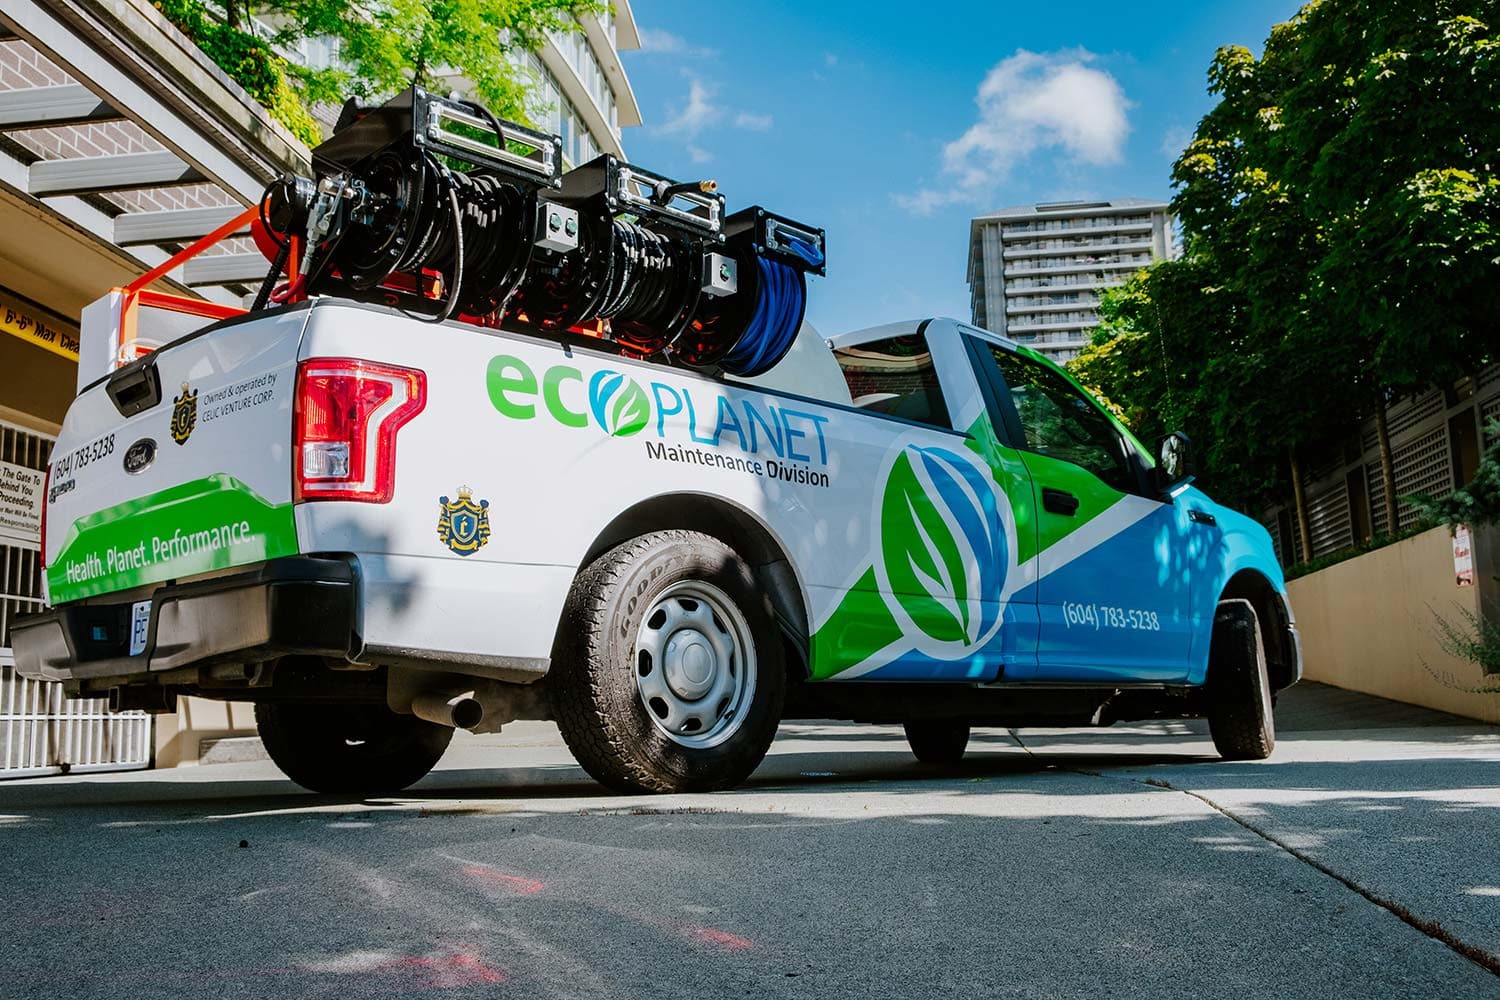 Frequently Asked Questions About Eco Planet Cleaning & Maintenance